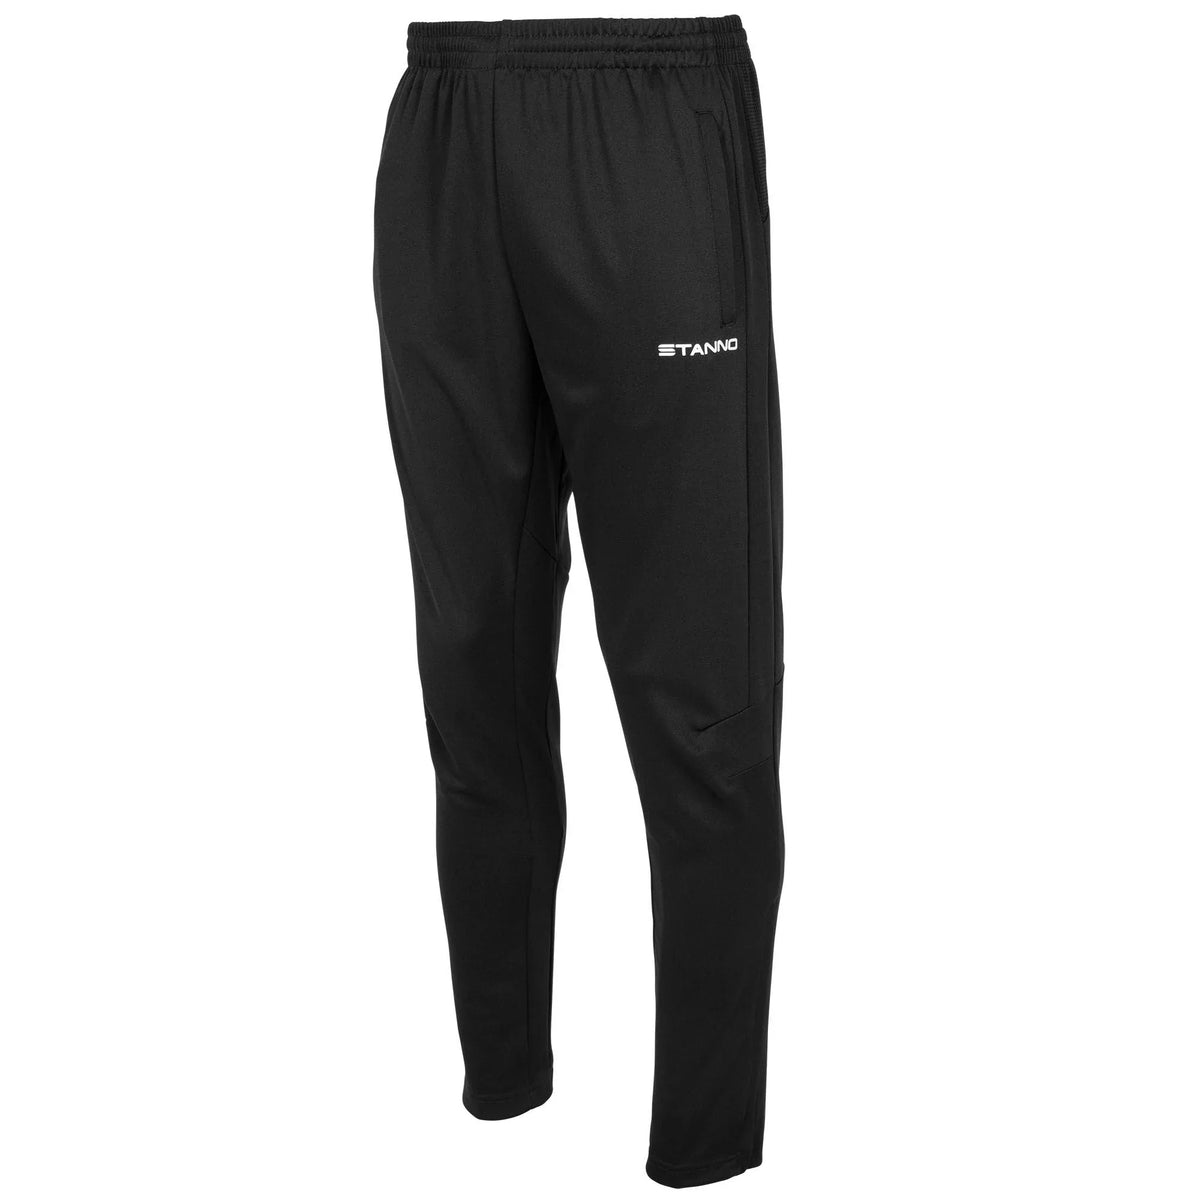 Rocklands Youth FC Stanno Pride Tracksuit Bottoms in Adult